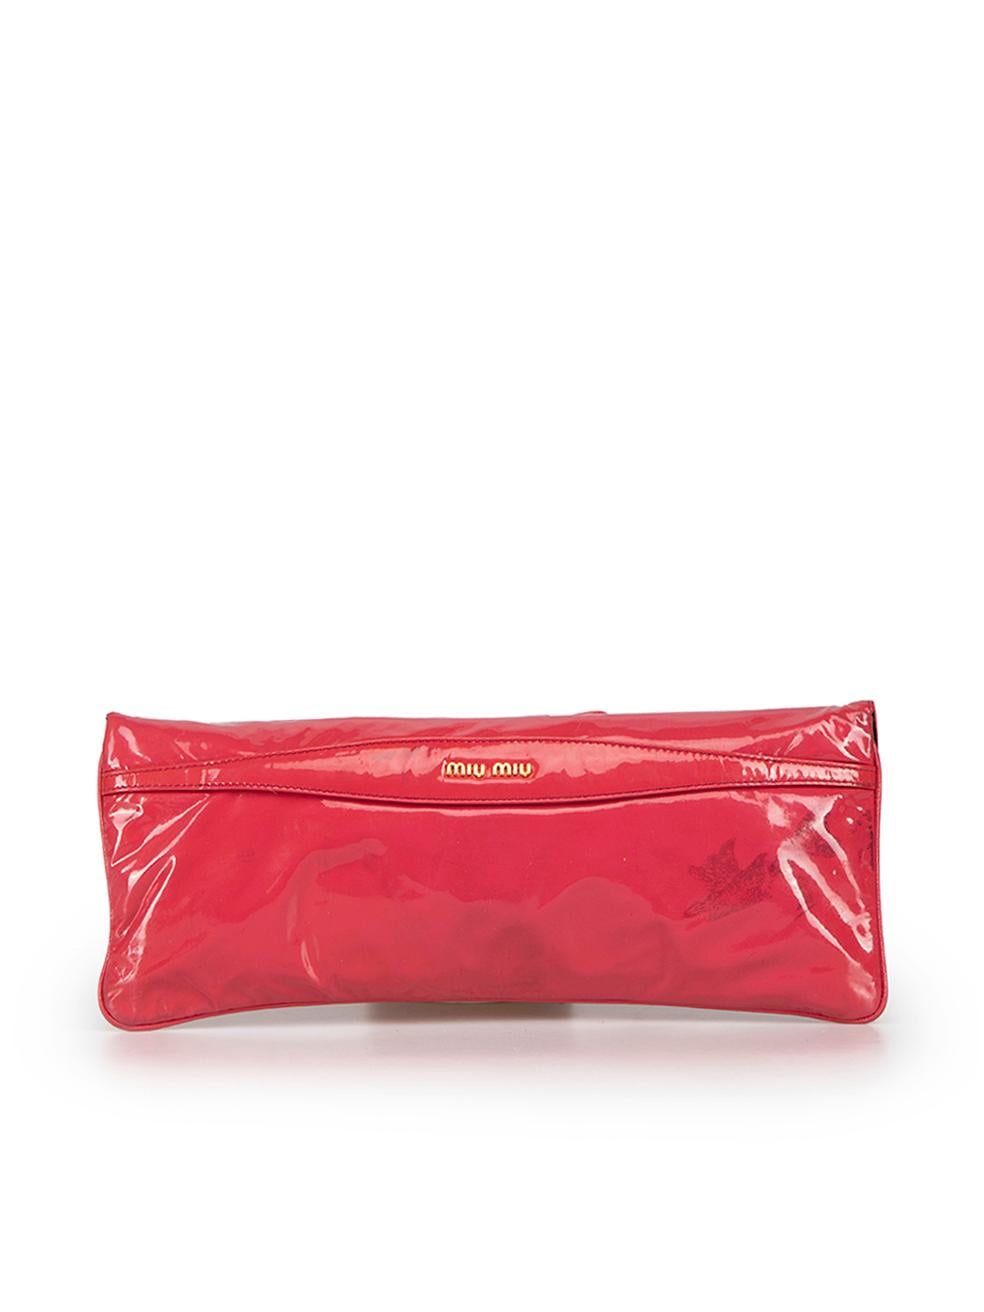 Miu Miu Pink Patent Leather Bow Long Clutch In Good Condition For Sale In London, GB